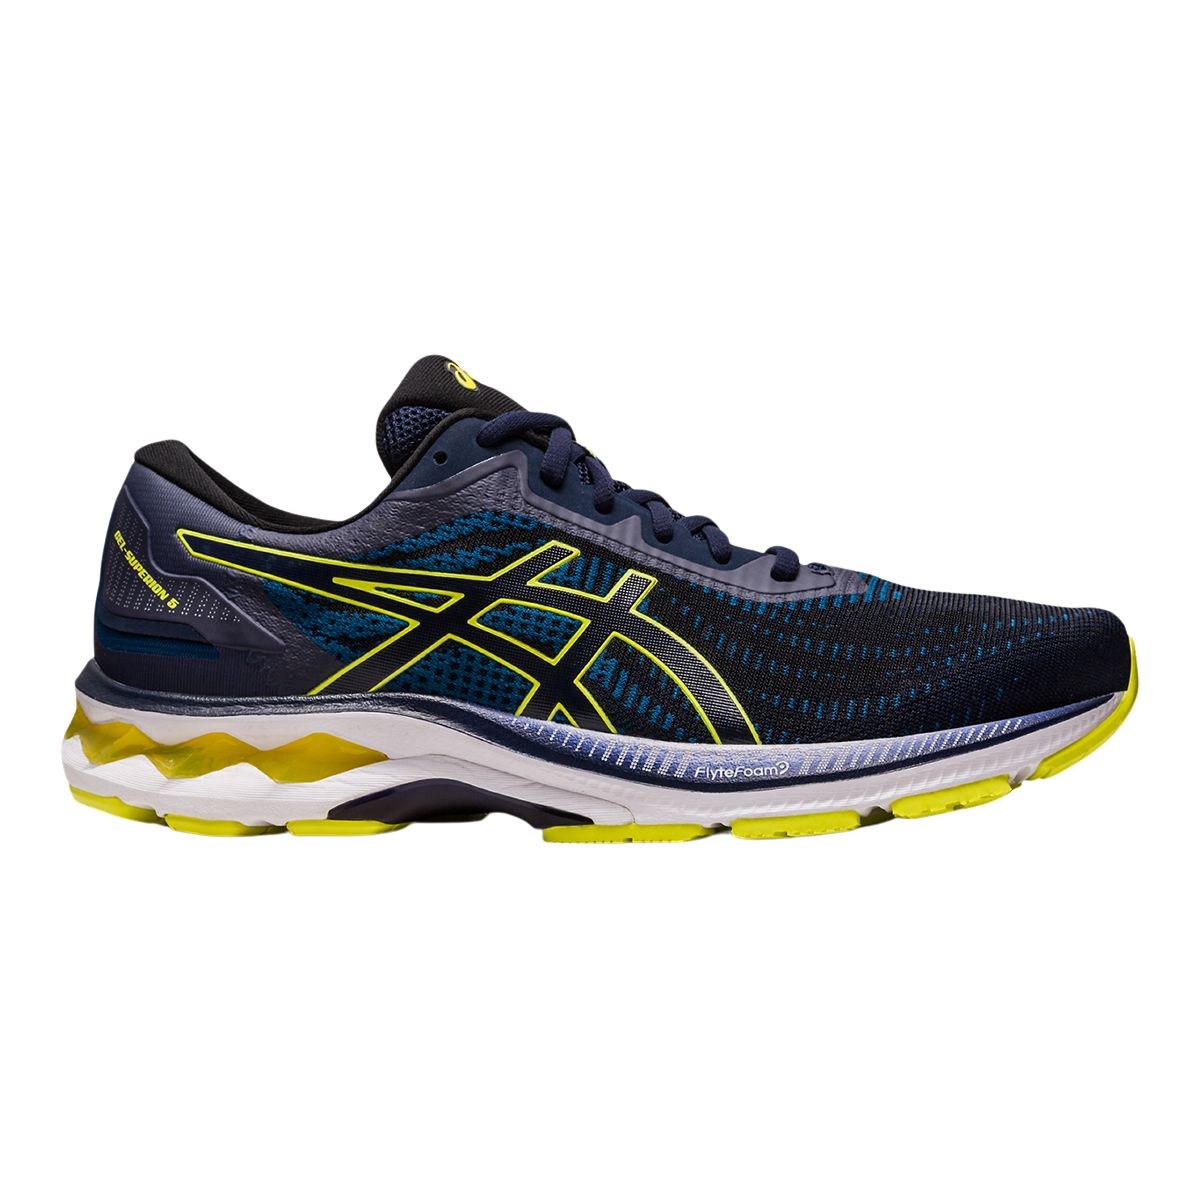 Image of Asics Men's Superion 5 Lightweight Mesh Cushioned Running Shoes